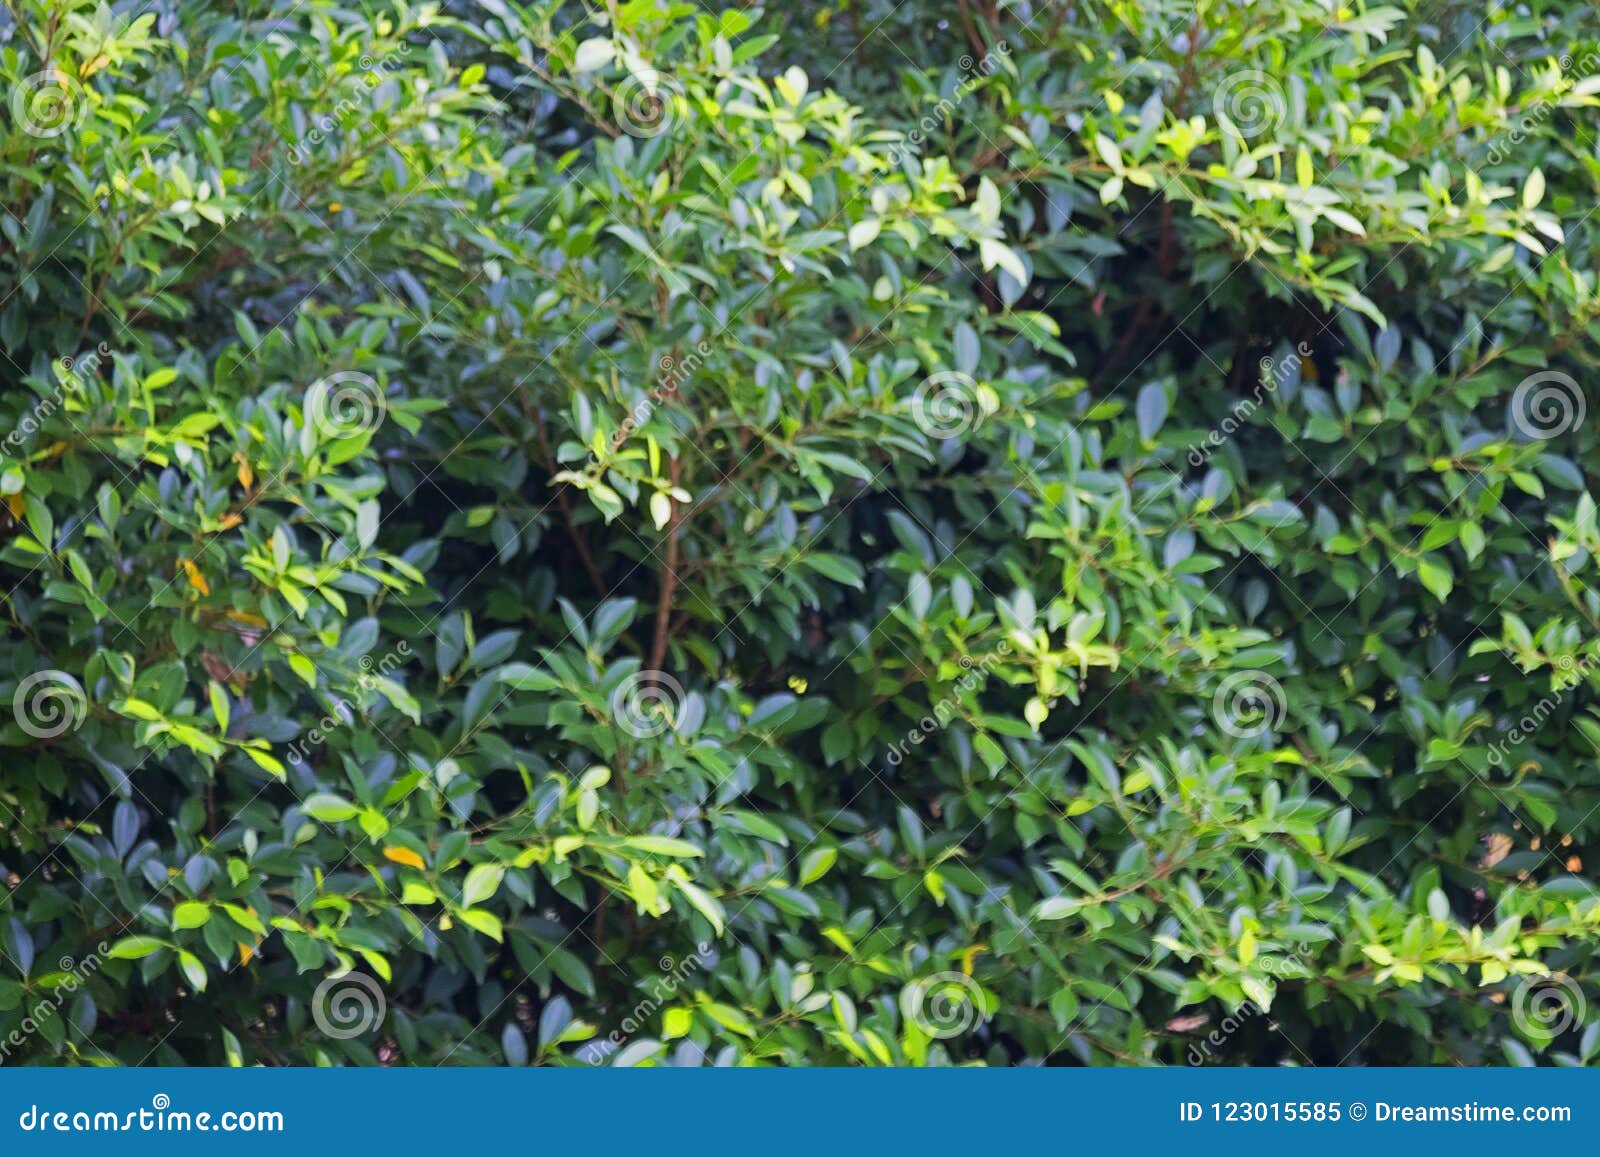 Fresh Green Leaves Texture and  of Banyan Tree from Top View,  Natural Wallpaper Stock Image - Image of forest, branch: 123015585